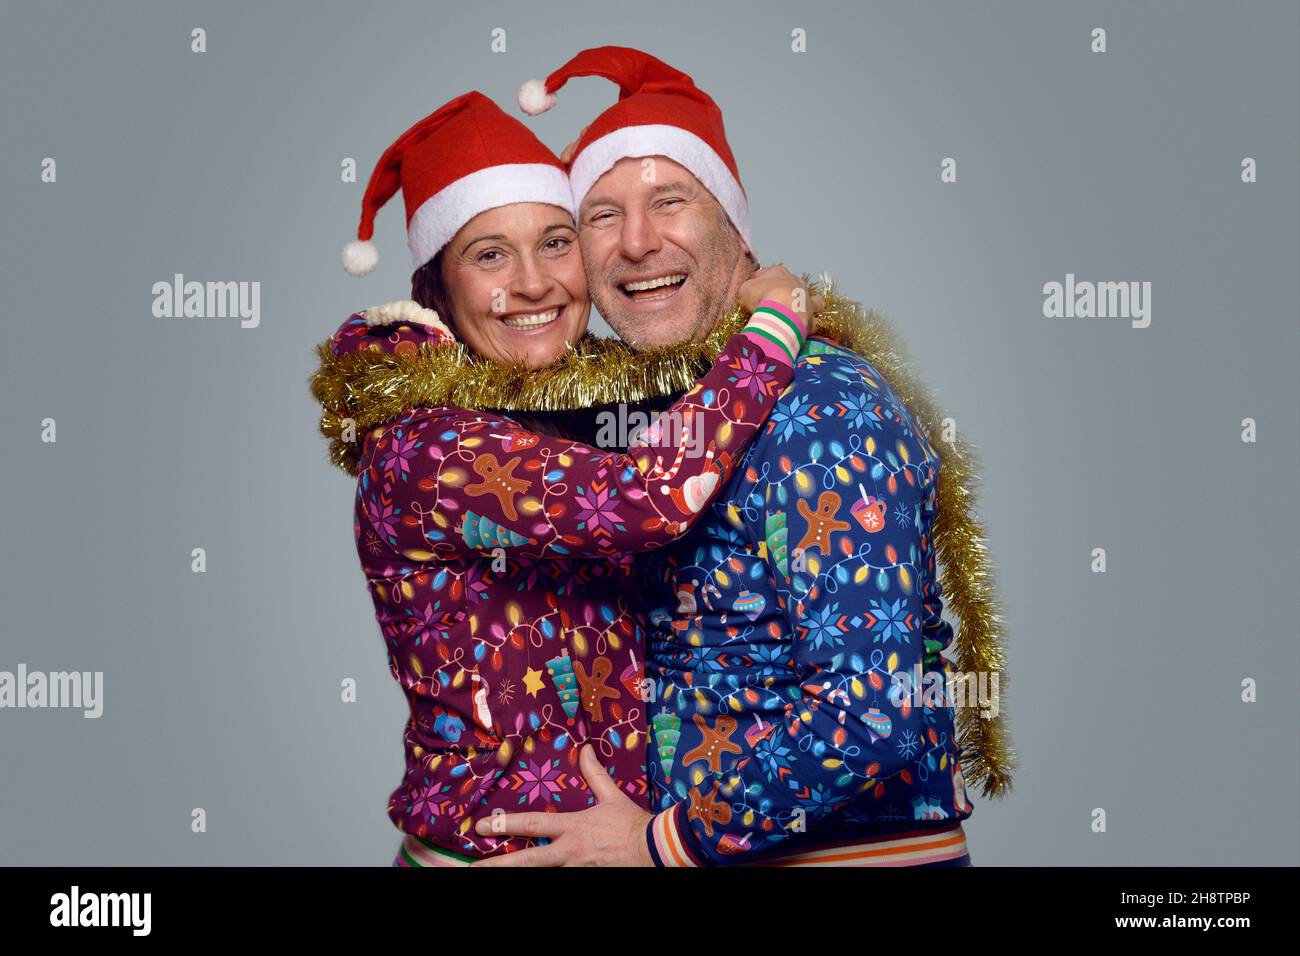 Joyful married couple celebrating Christmas together in festive red Santa hats and themed Xmas tops standing hugging and laughing as they turn to smil Stock Photo